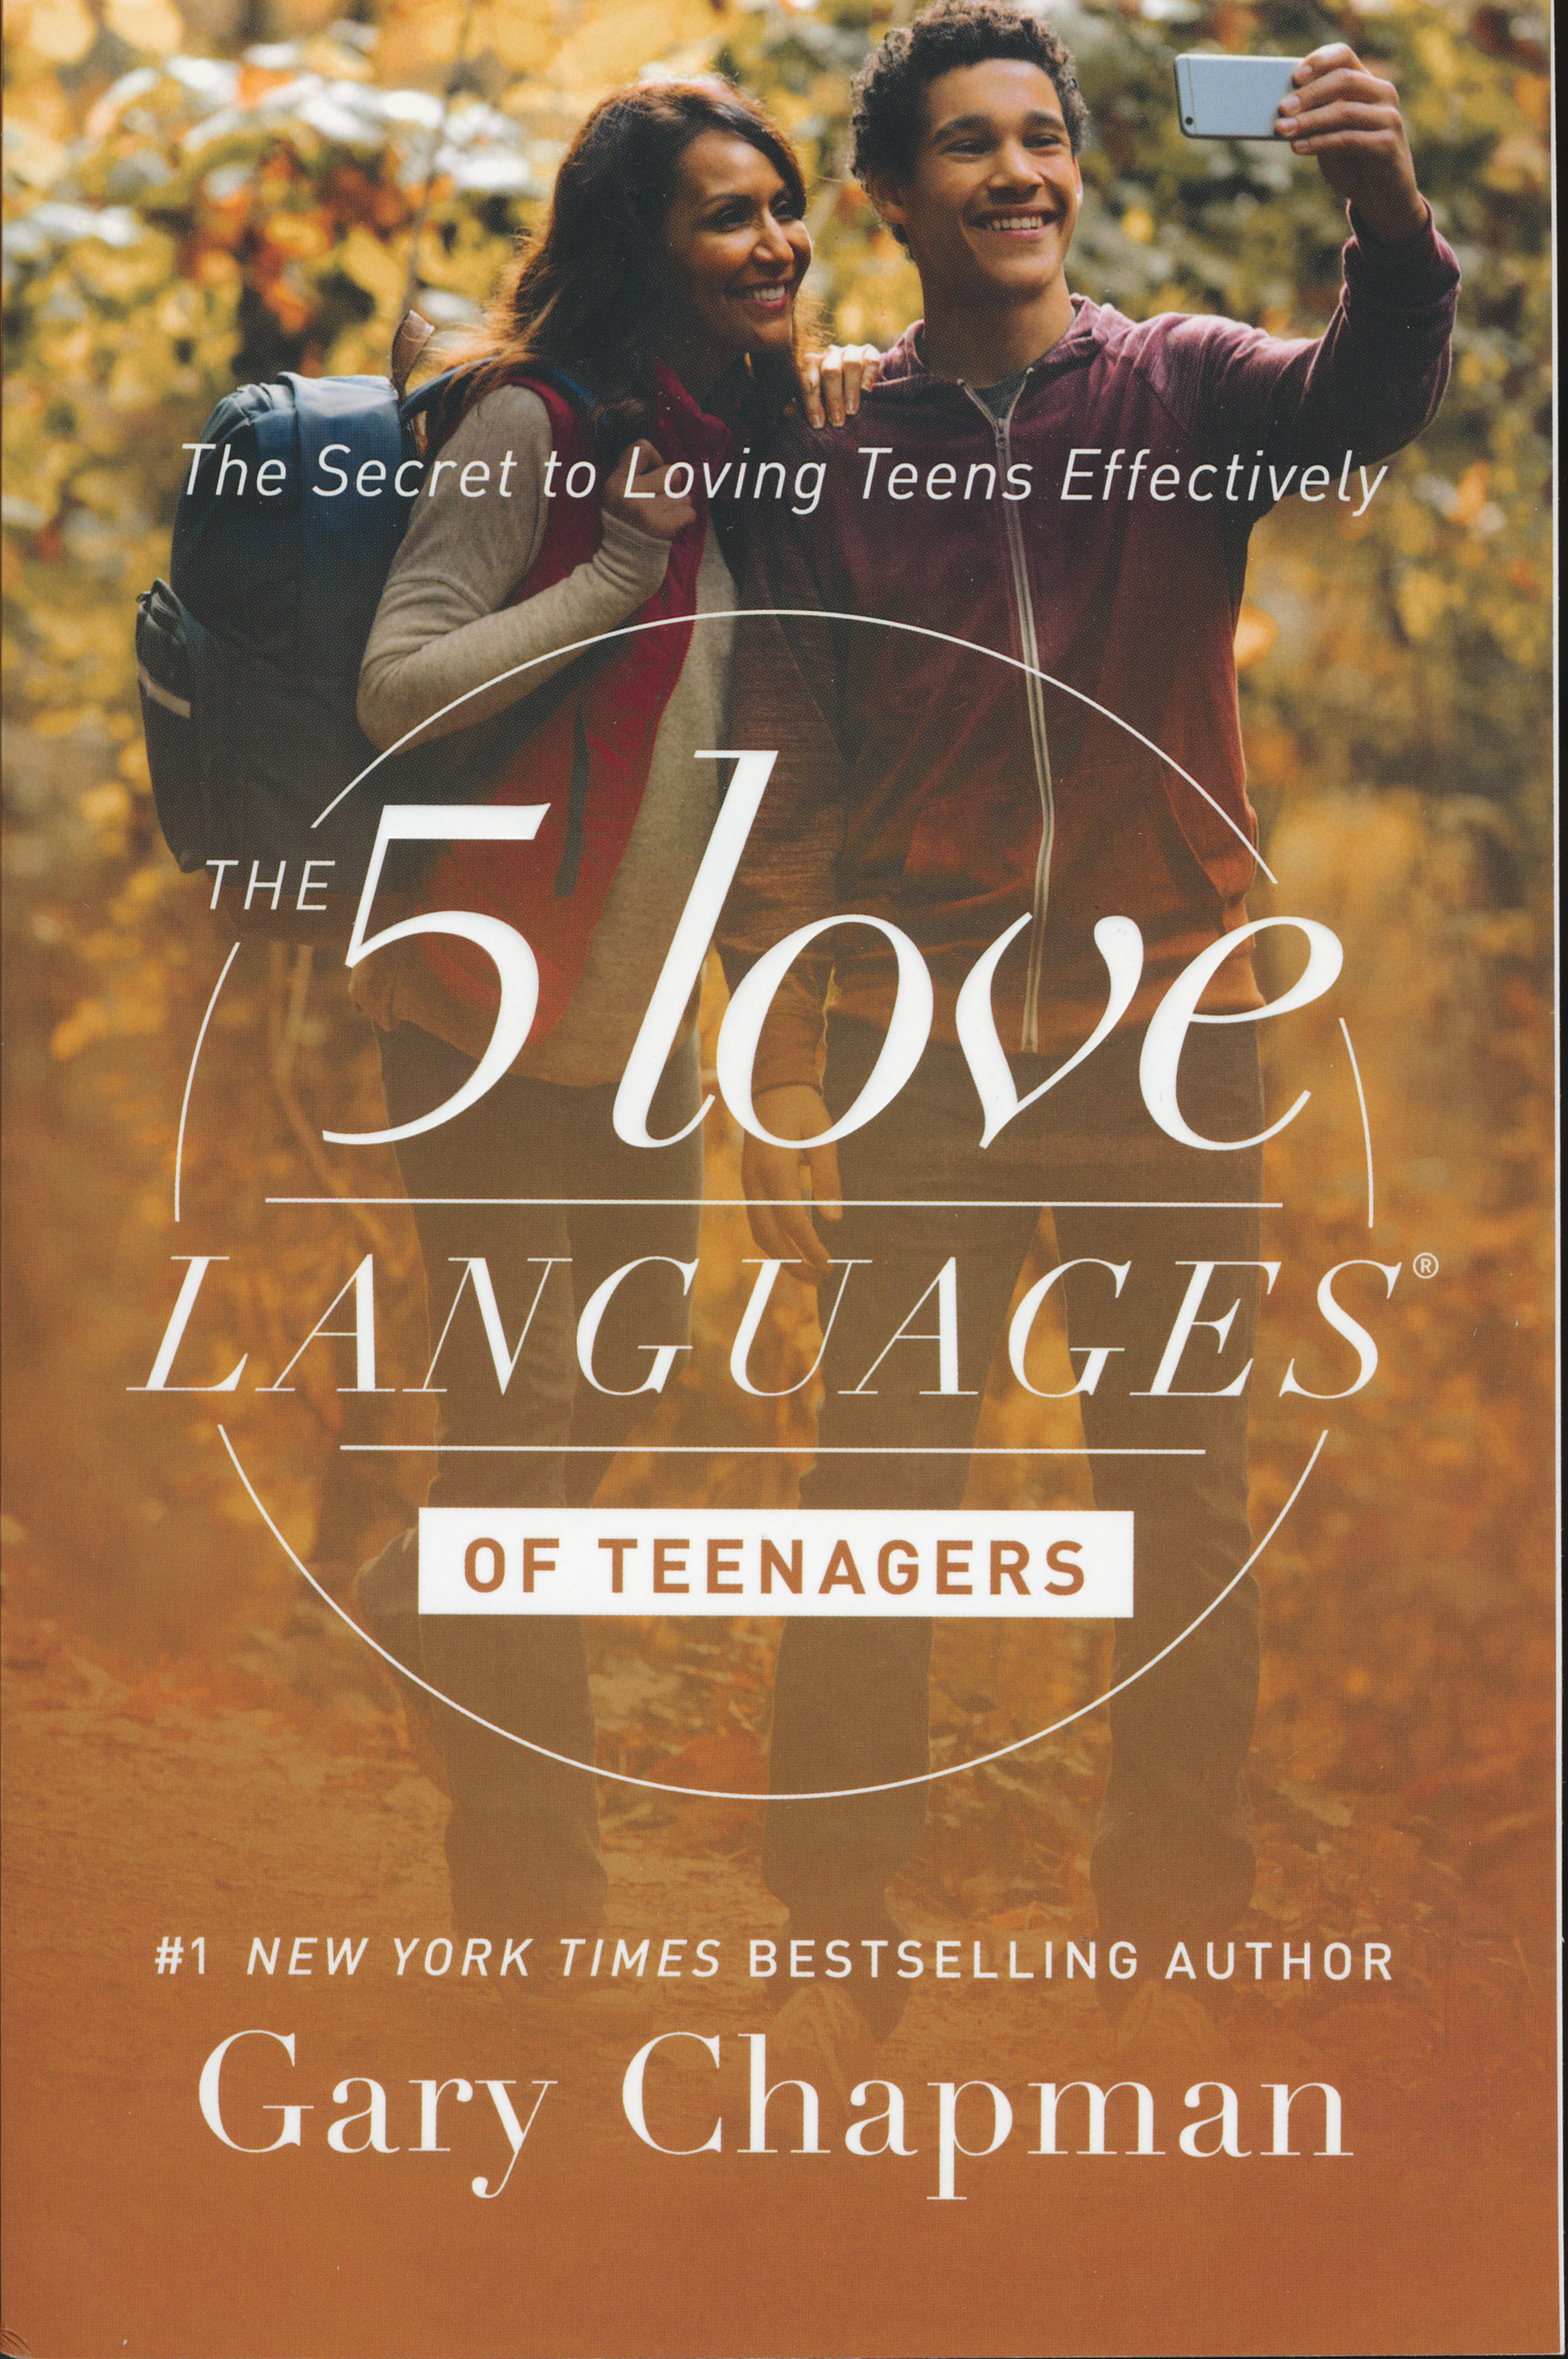 The 5 Love Languages of Teenagers: The Secret to Loving Teens Effectively by Gary Chapman 108-9780802412843